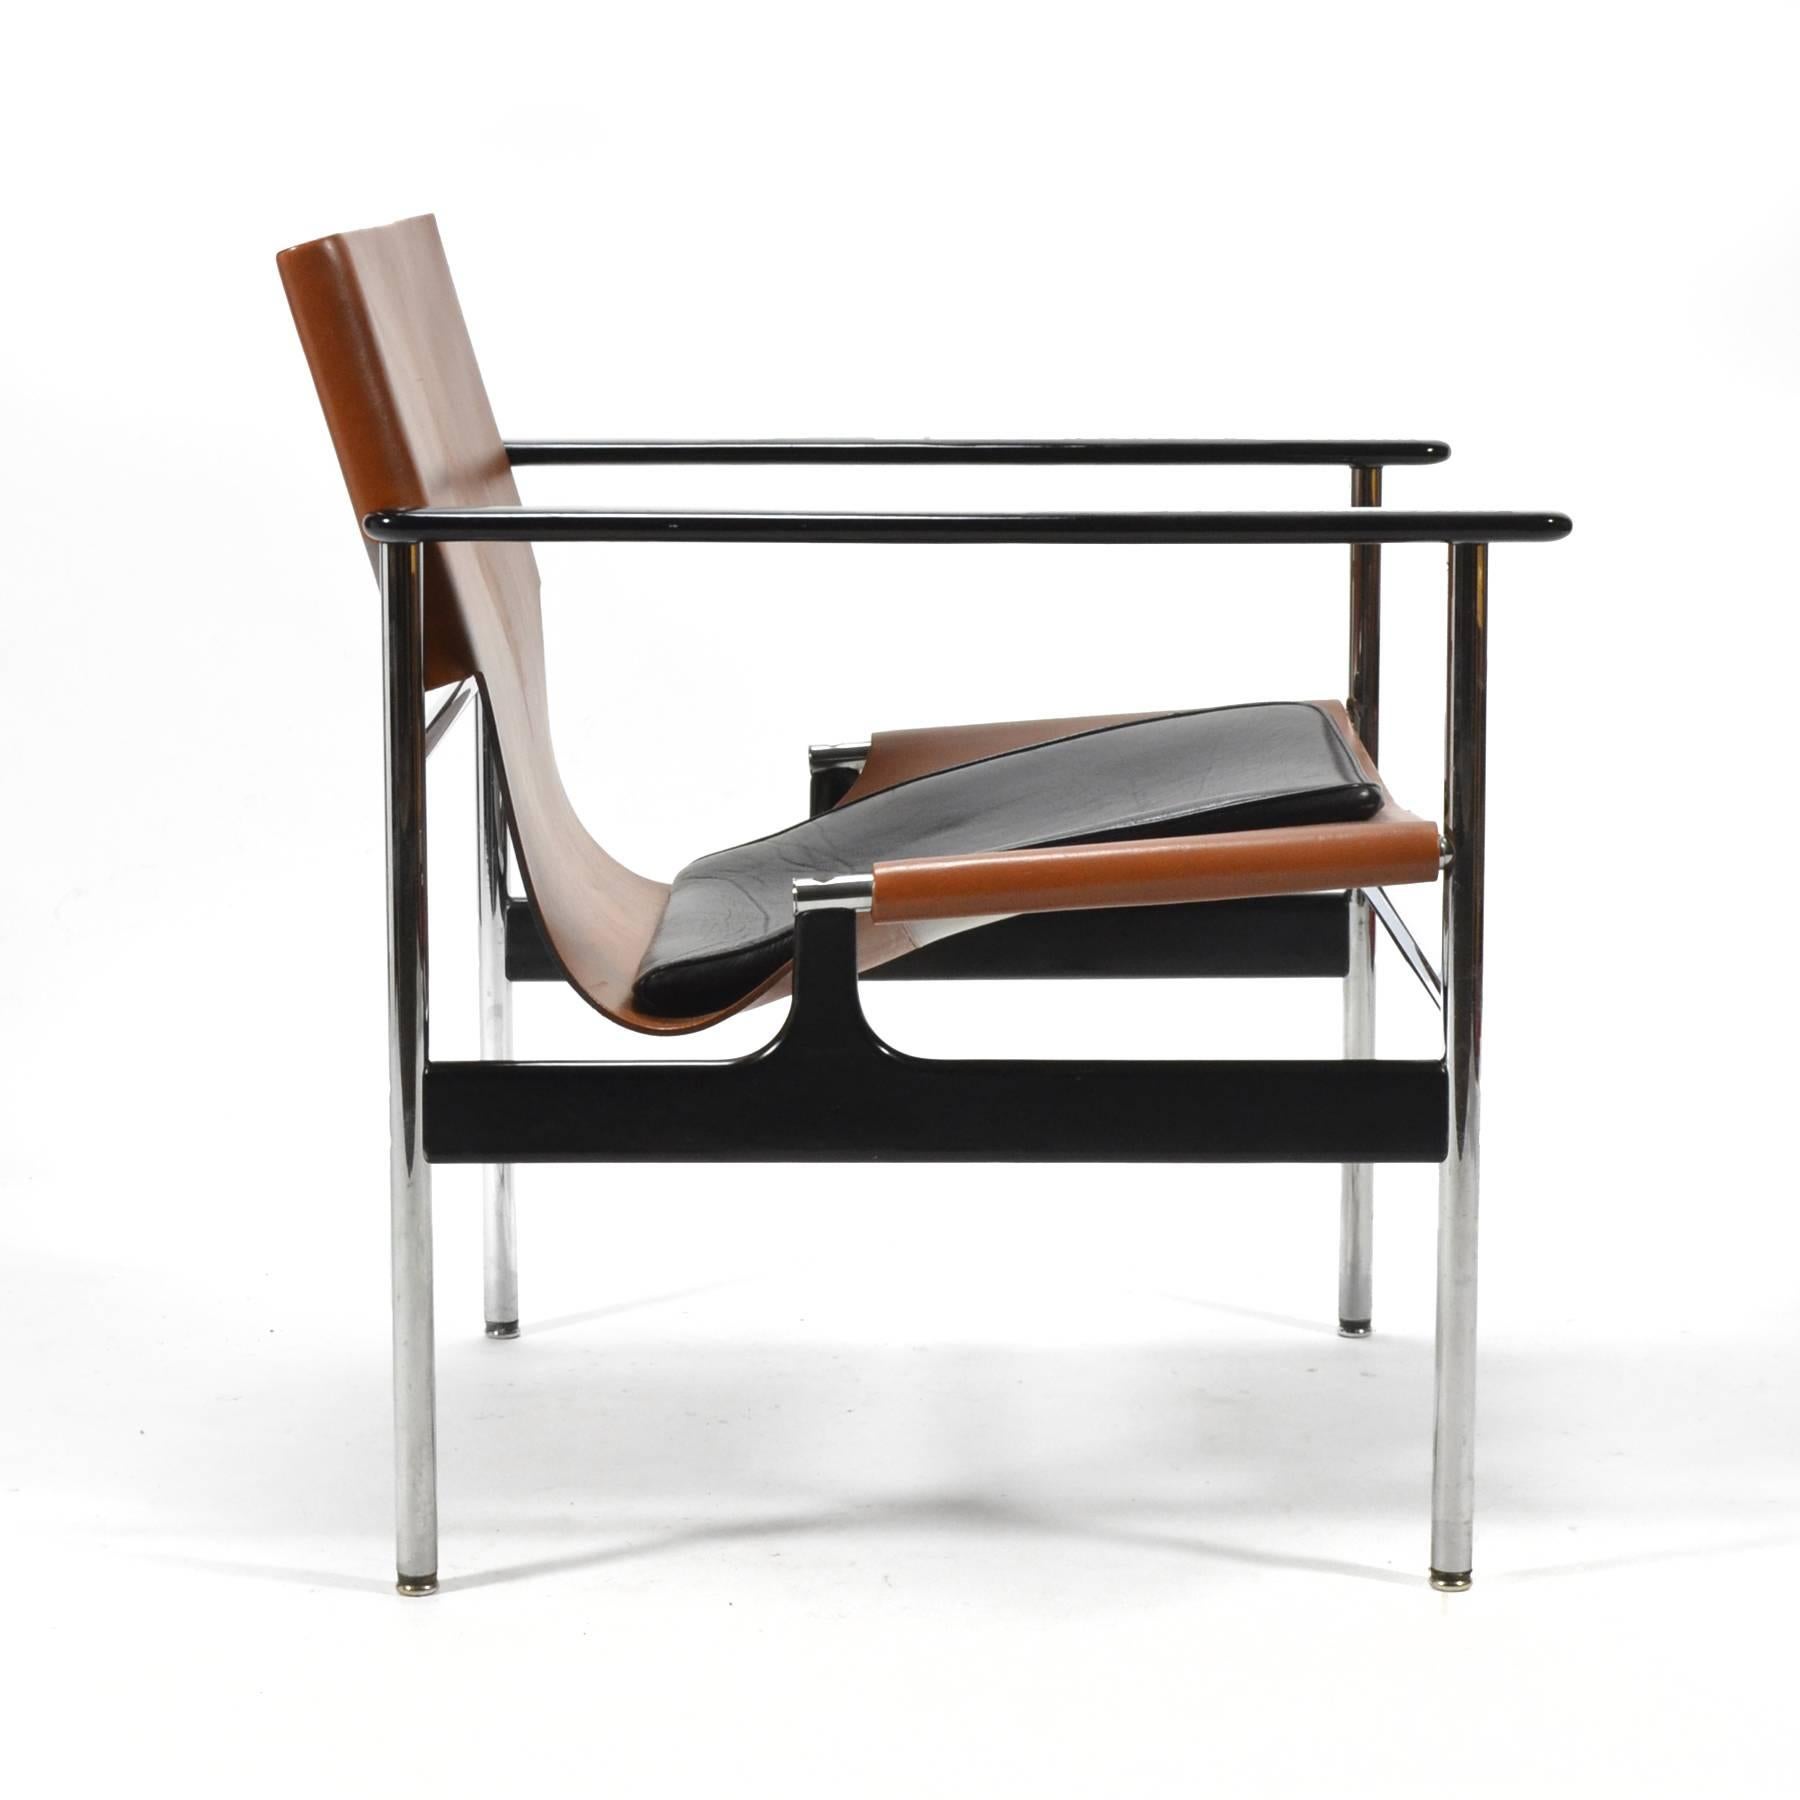 Charles Pollock's 1960 design for Knoll references Le Corbusier's LC1 lounge chair while incorporating new materials. A surprisingly comfortable easy chair, the seat has a wonderful relaxed pitch, the leather sling cradles the sitter, and the padded